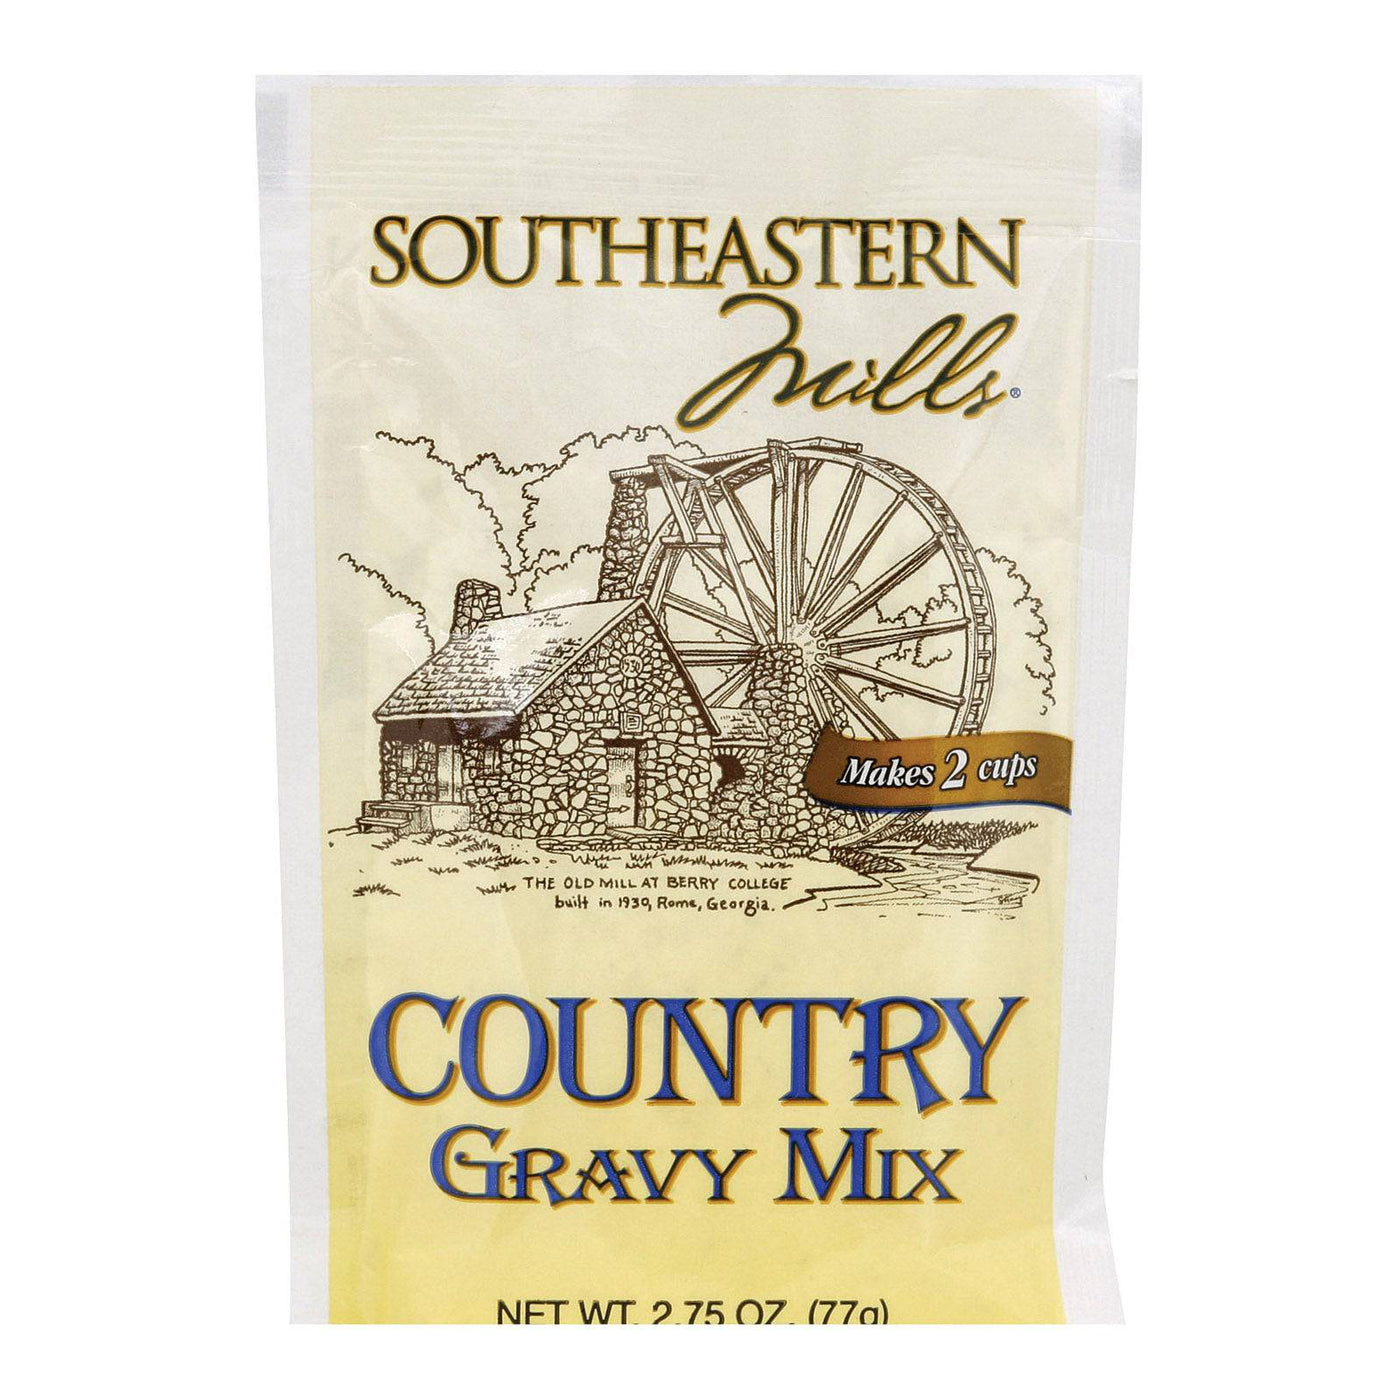 Buy Southeastern Mills Gravy - Country - Case Of 24 - 2.75 Oz  at OnlyNaturals.us